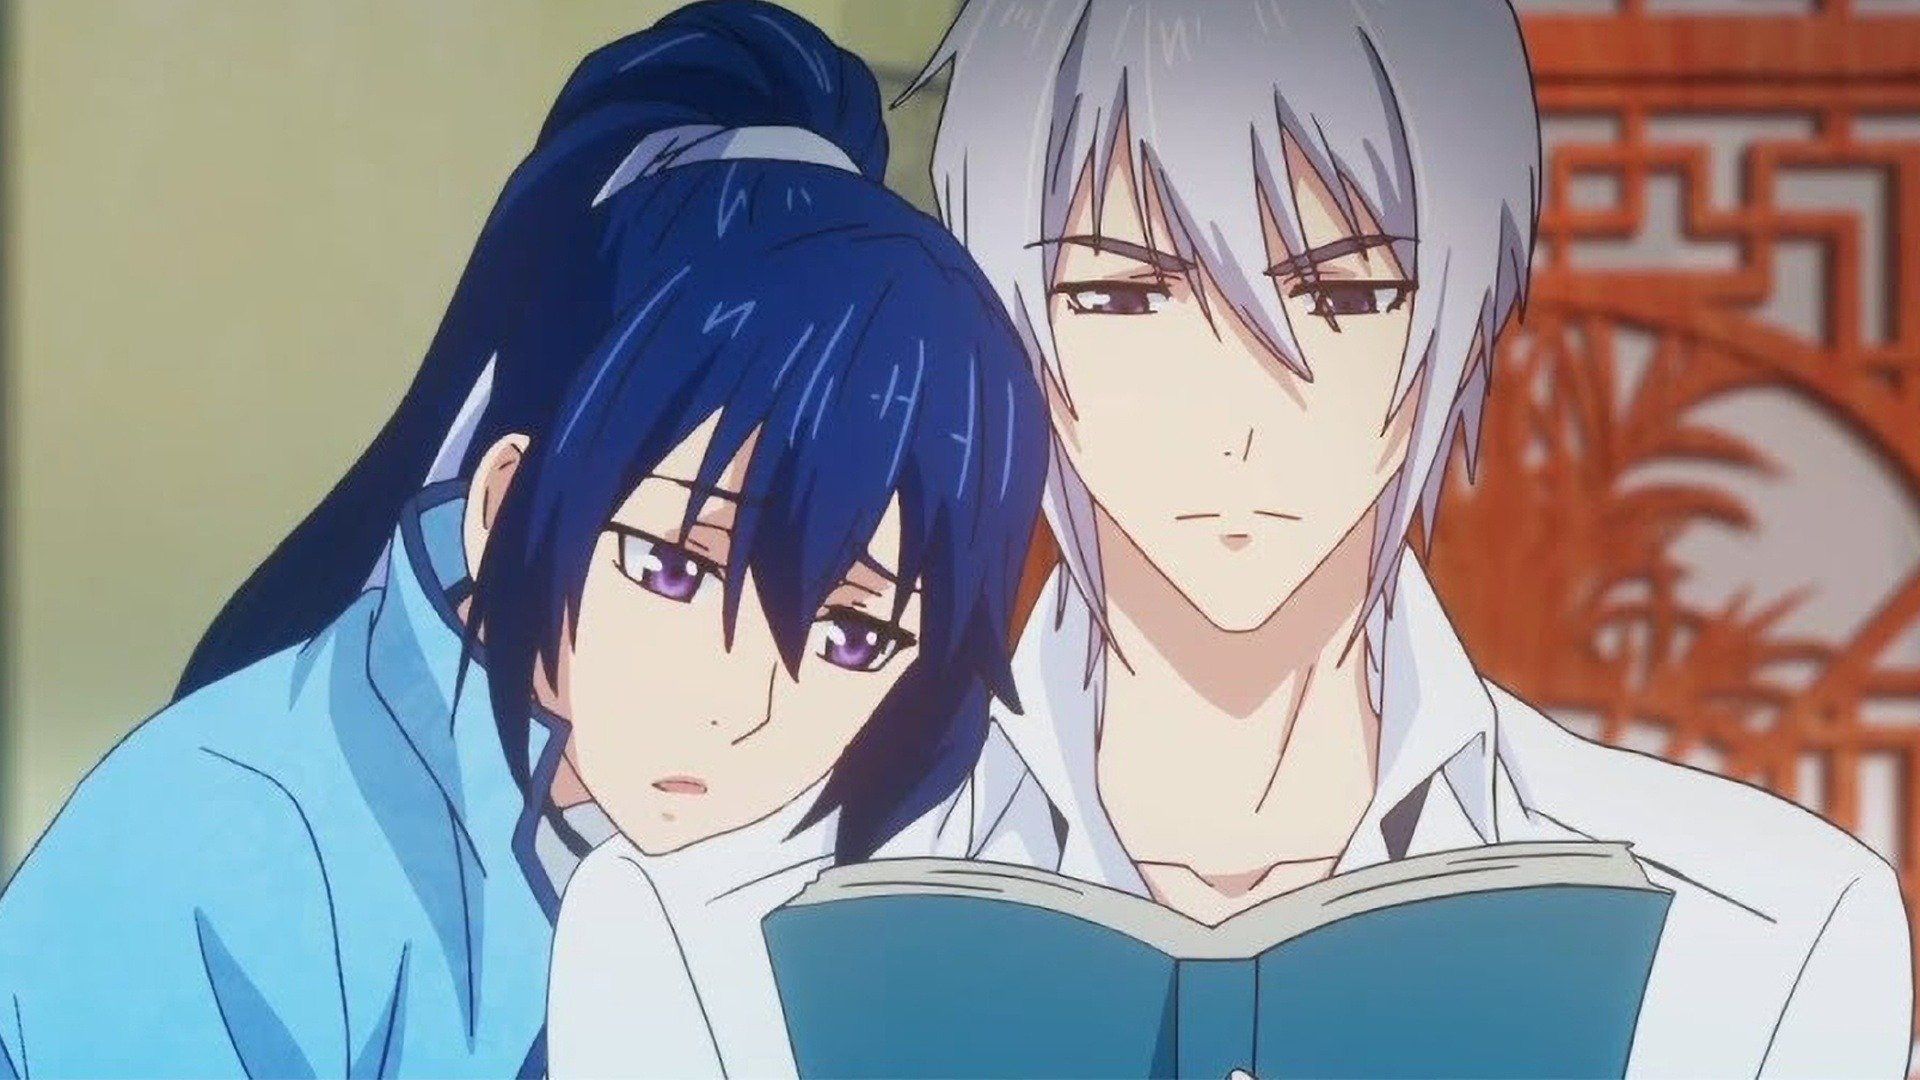 Where to watch Spiritpact TV series streaming online?